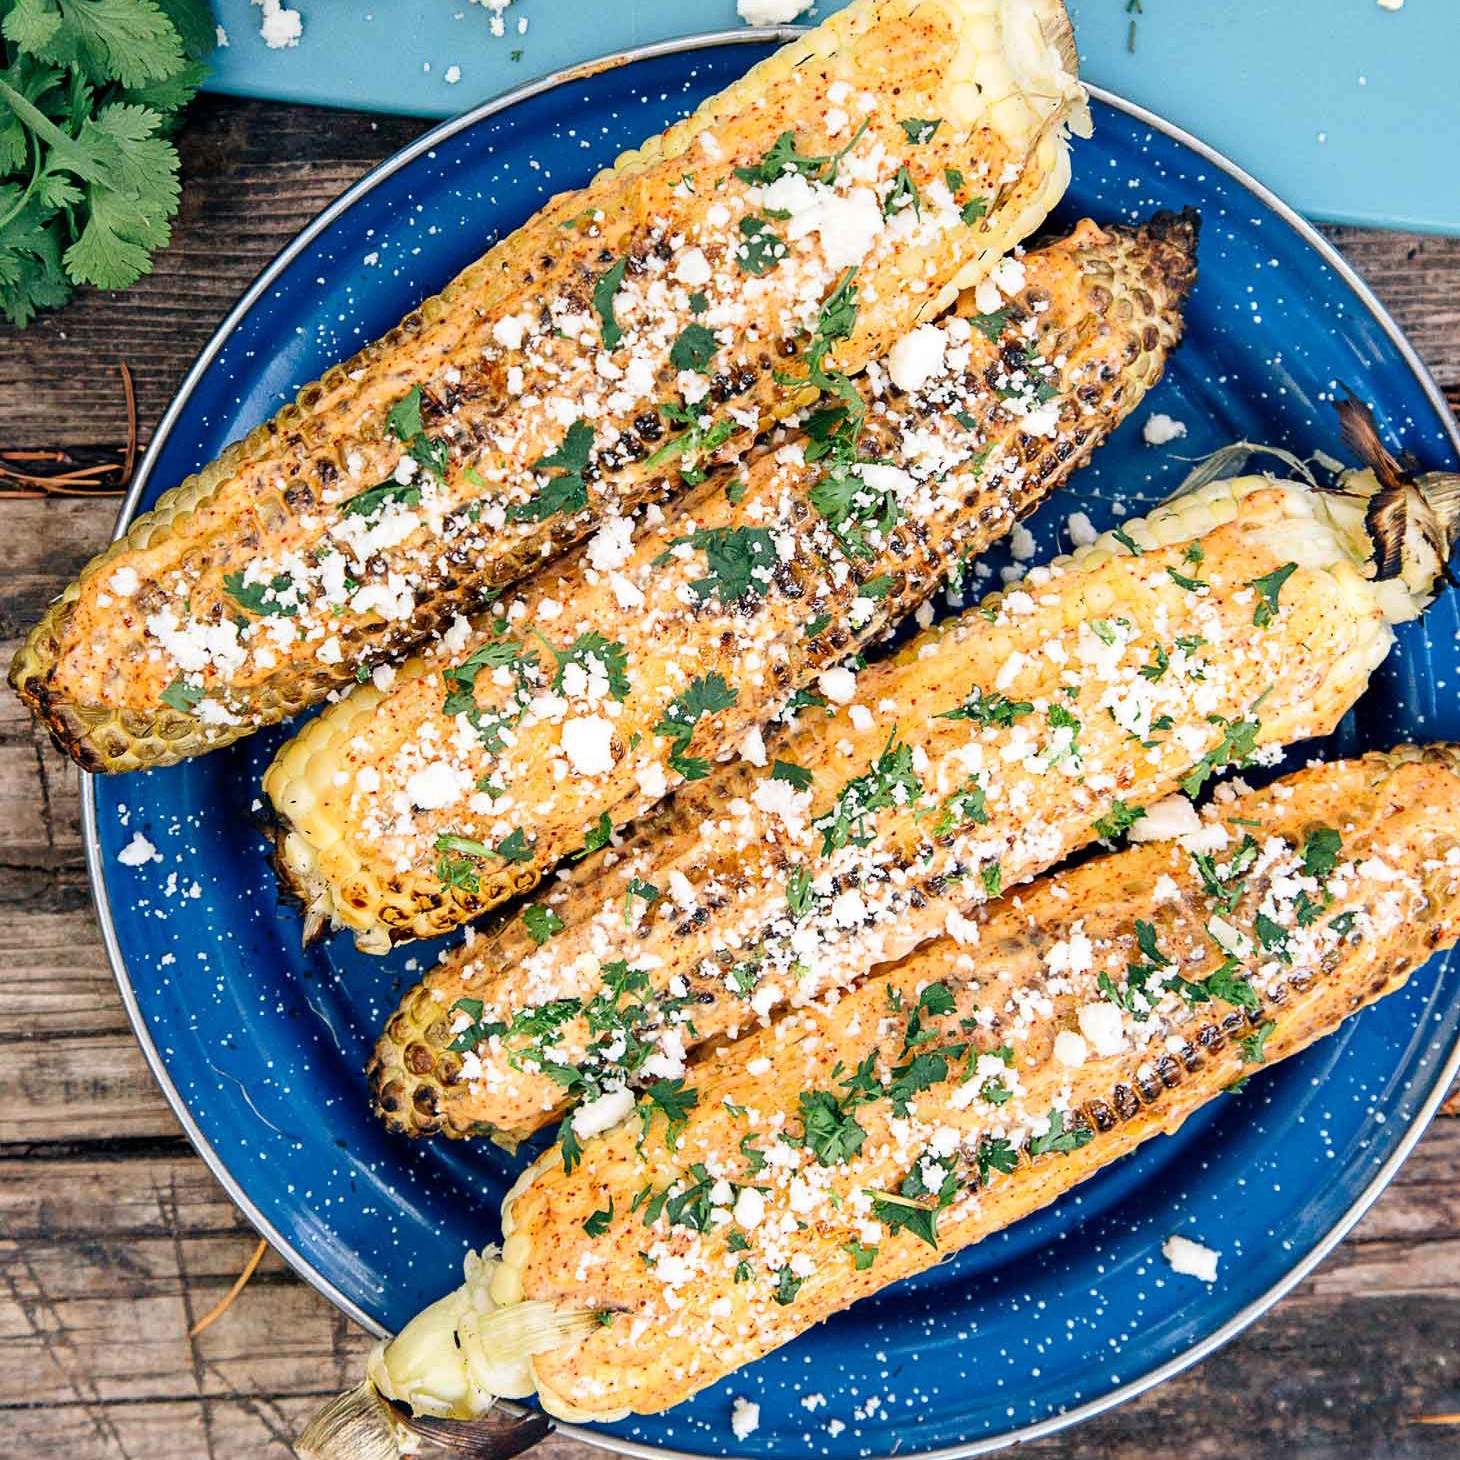 Campfire Grilled Mexican Street Corn